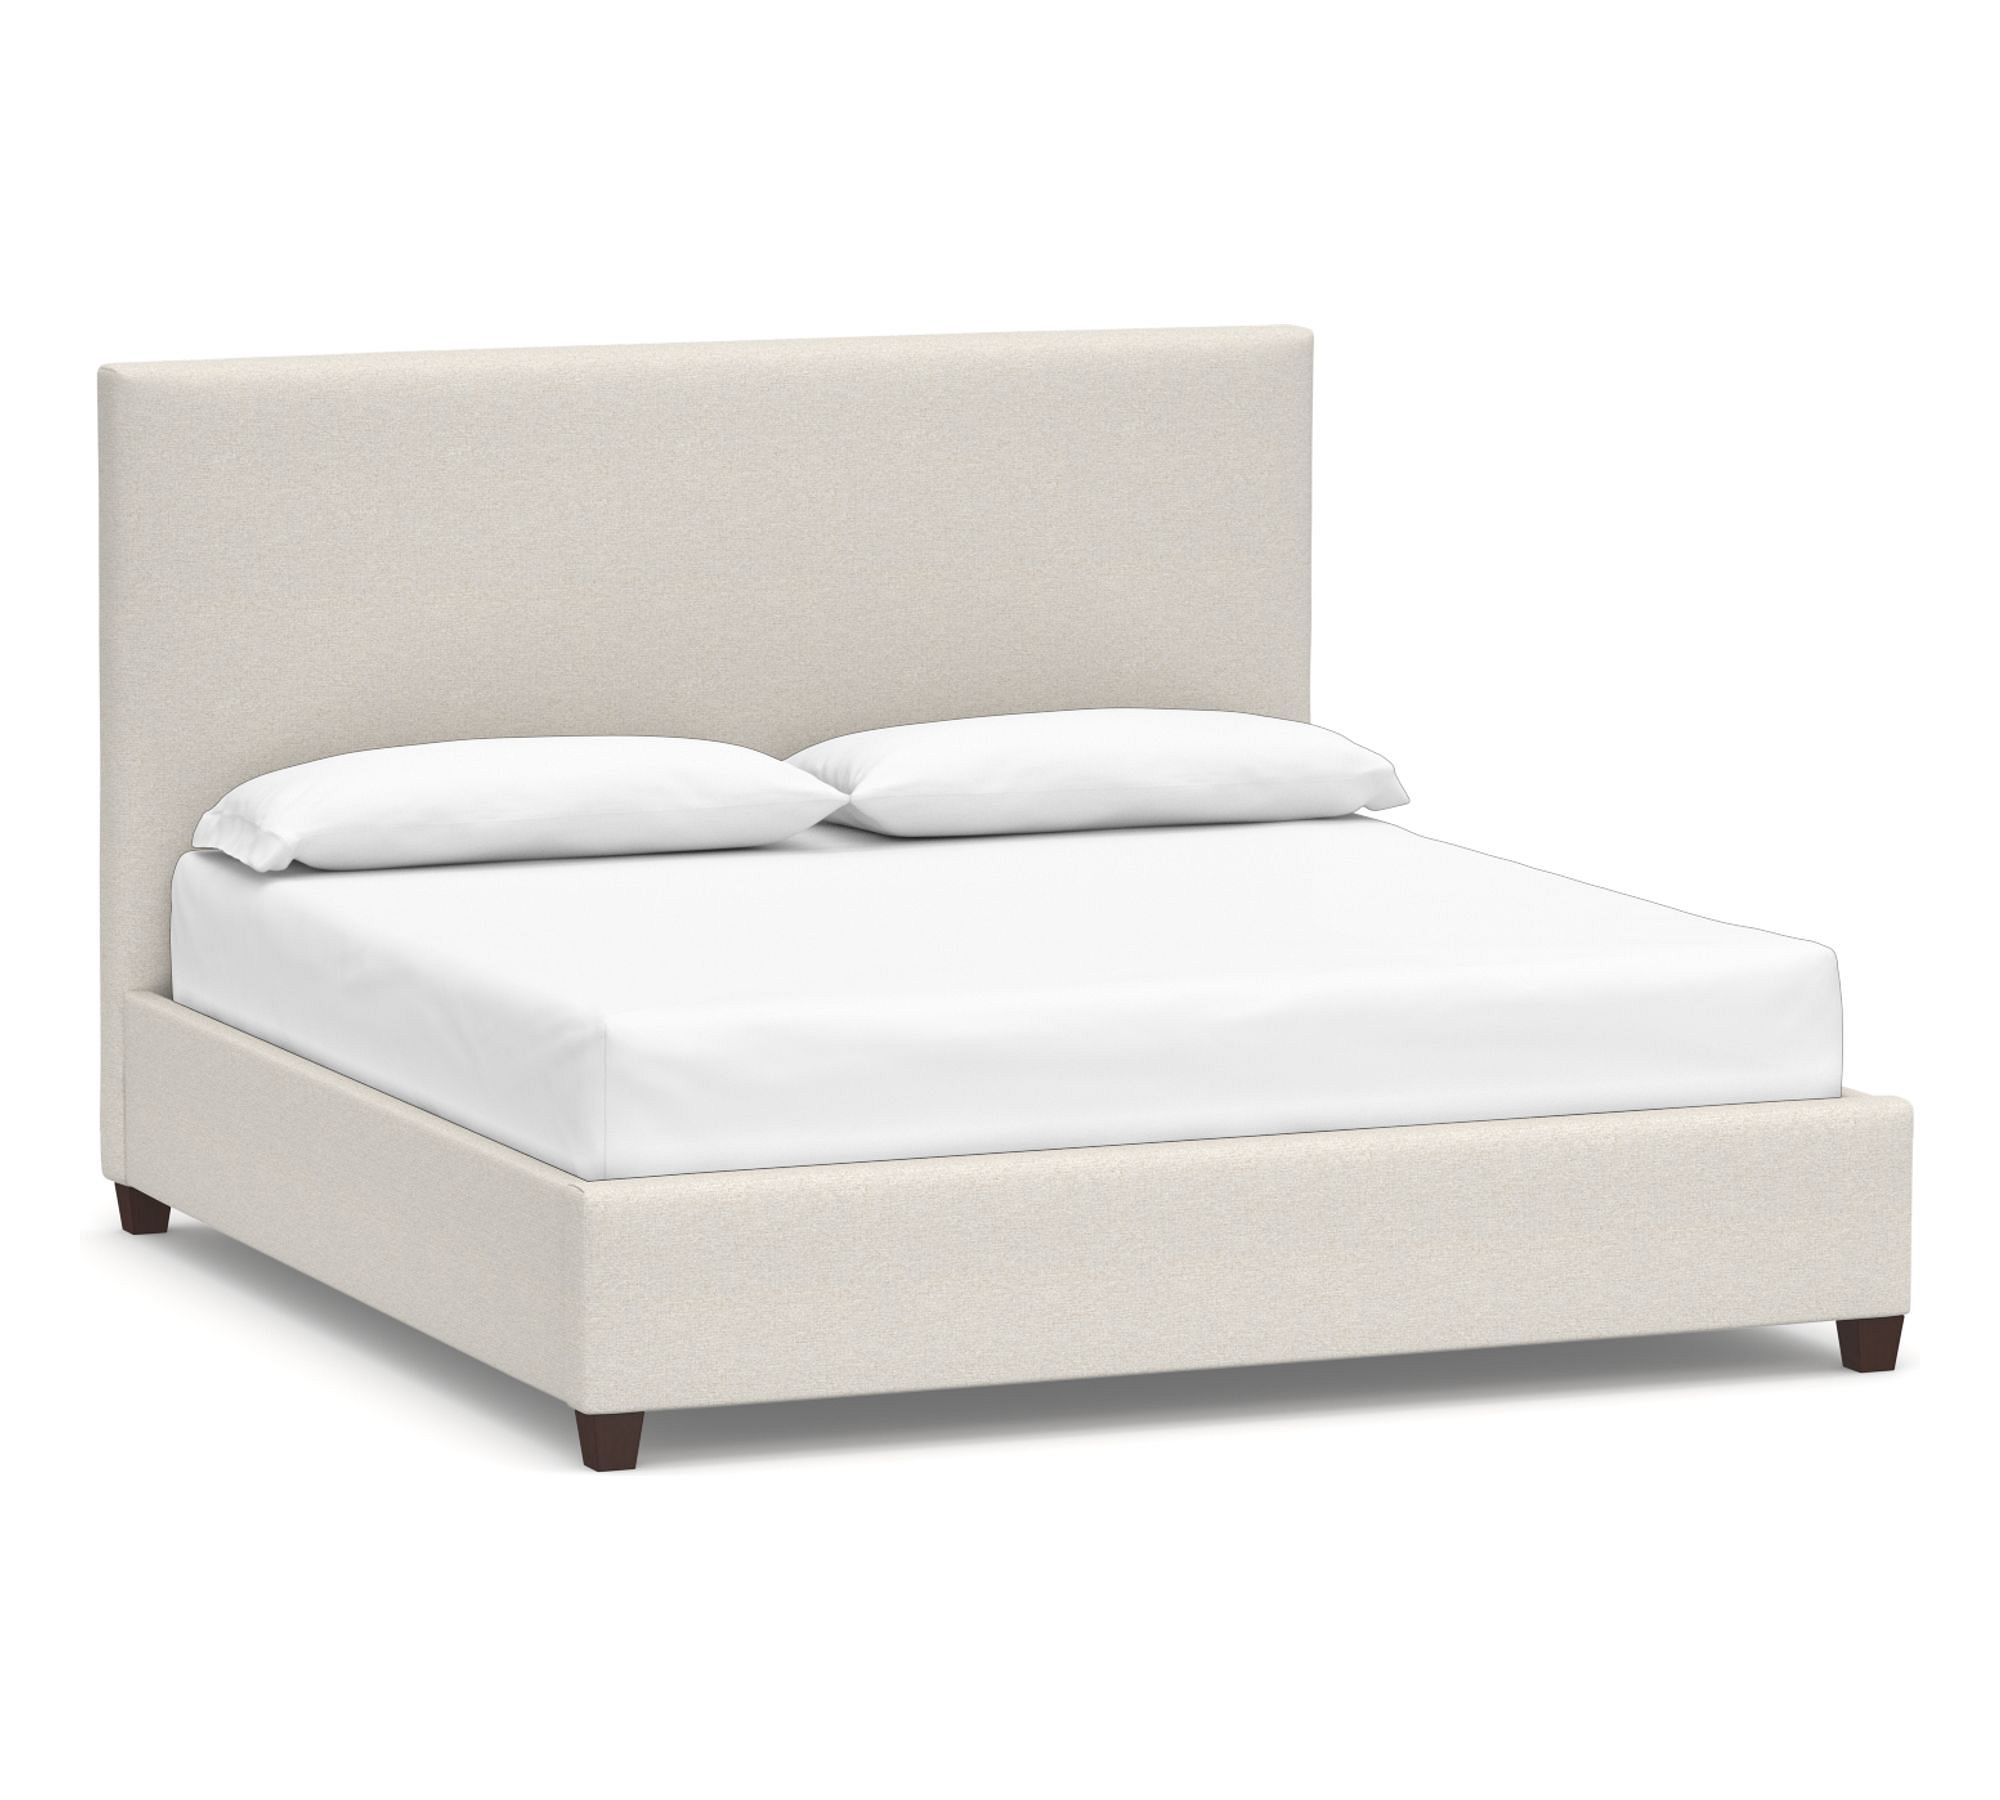 Raleigh Square Upholstered Bed - Quick Ship